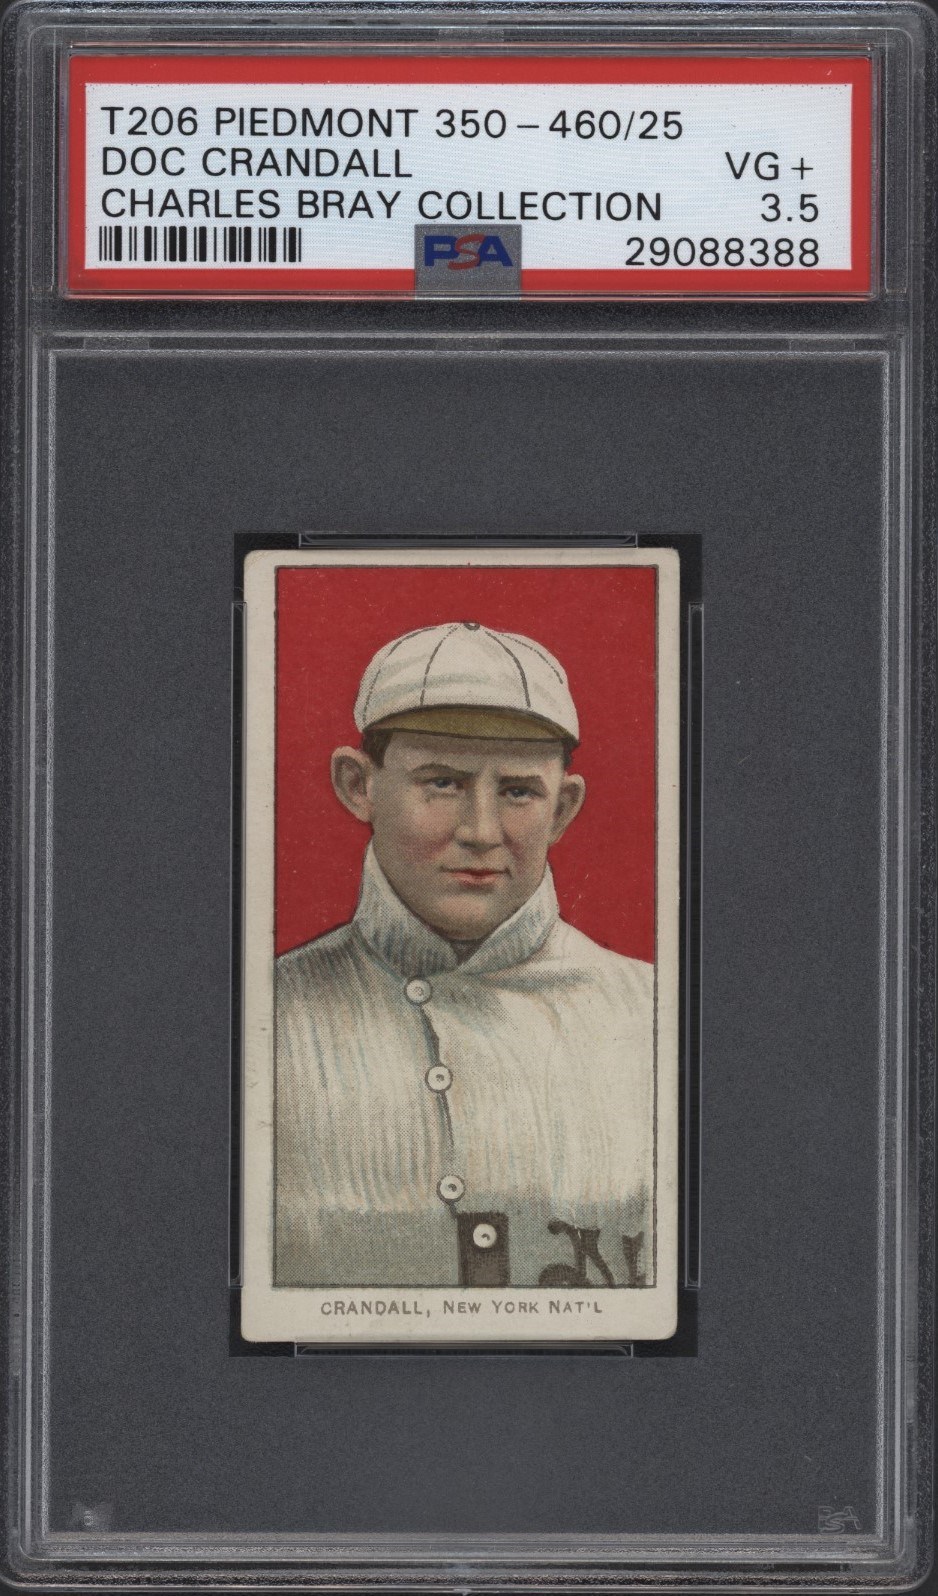 Baseball and Trading Cards - T206 Piedmont 350-460/25 Doc Crandall PSA 3.5 From the Charles Bray Collection